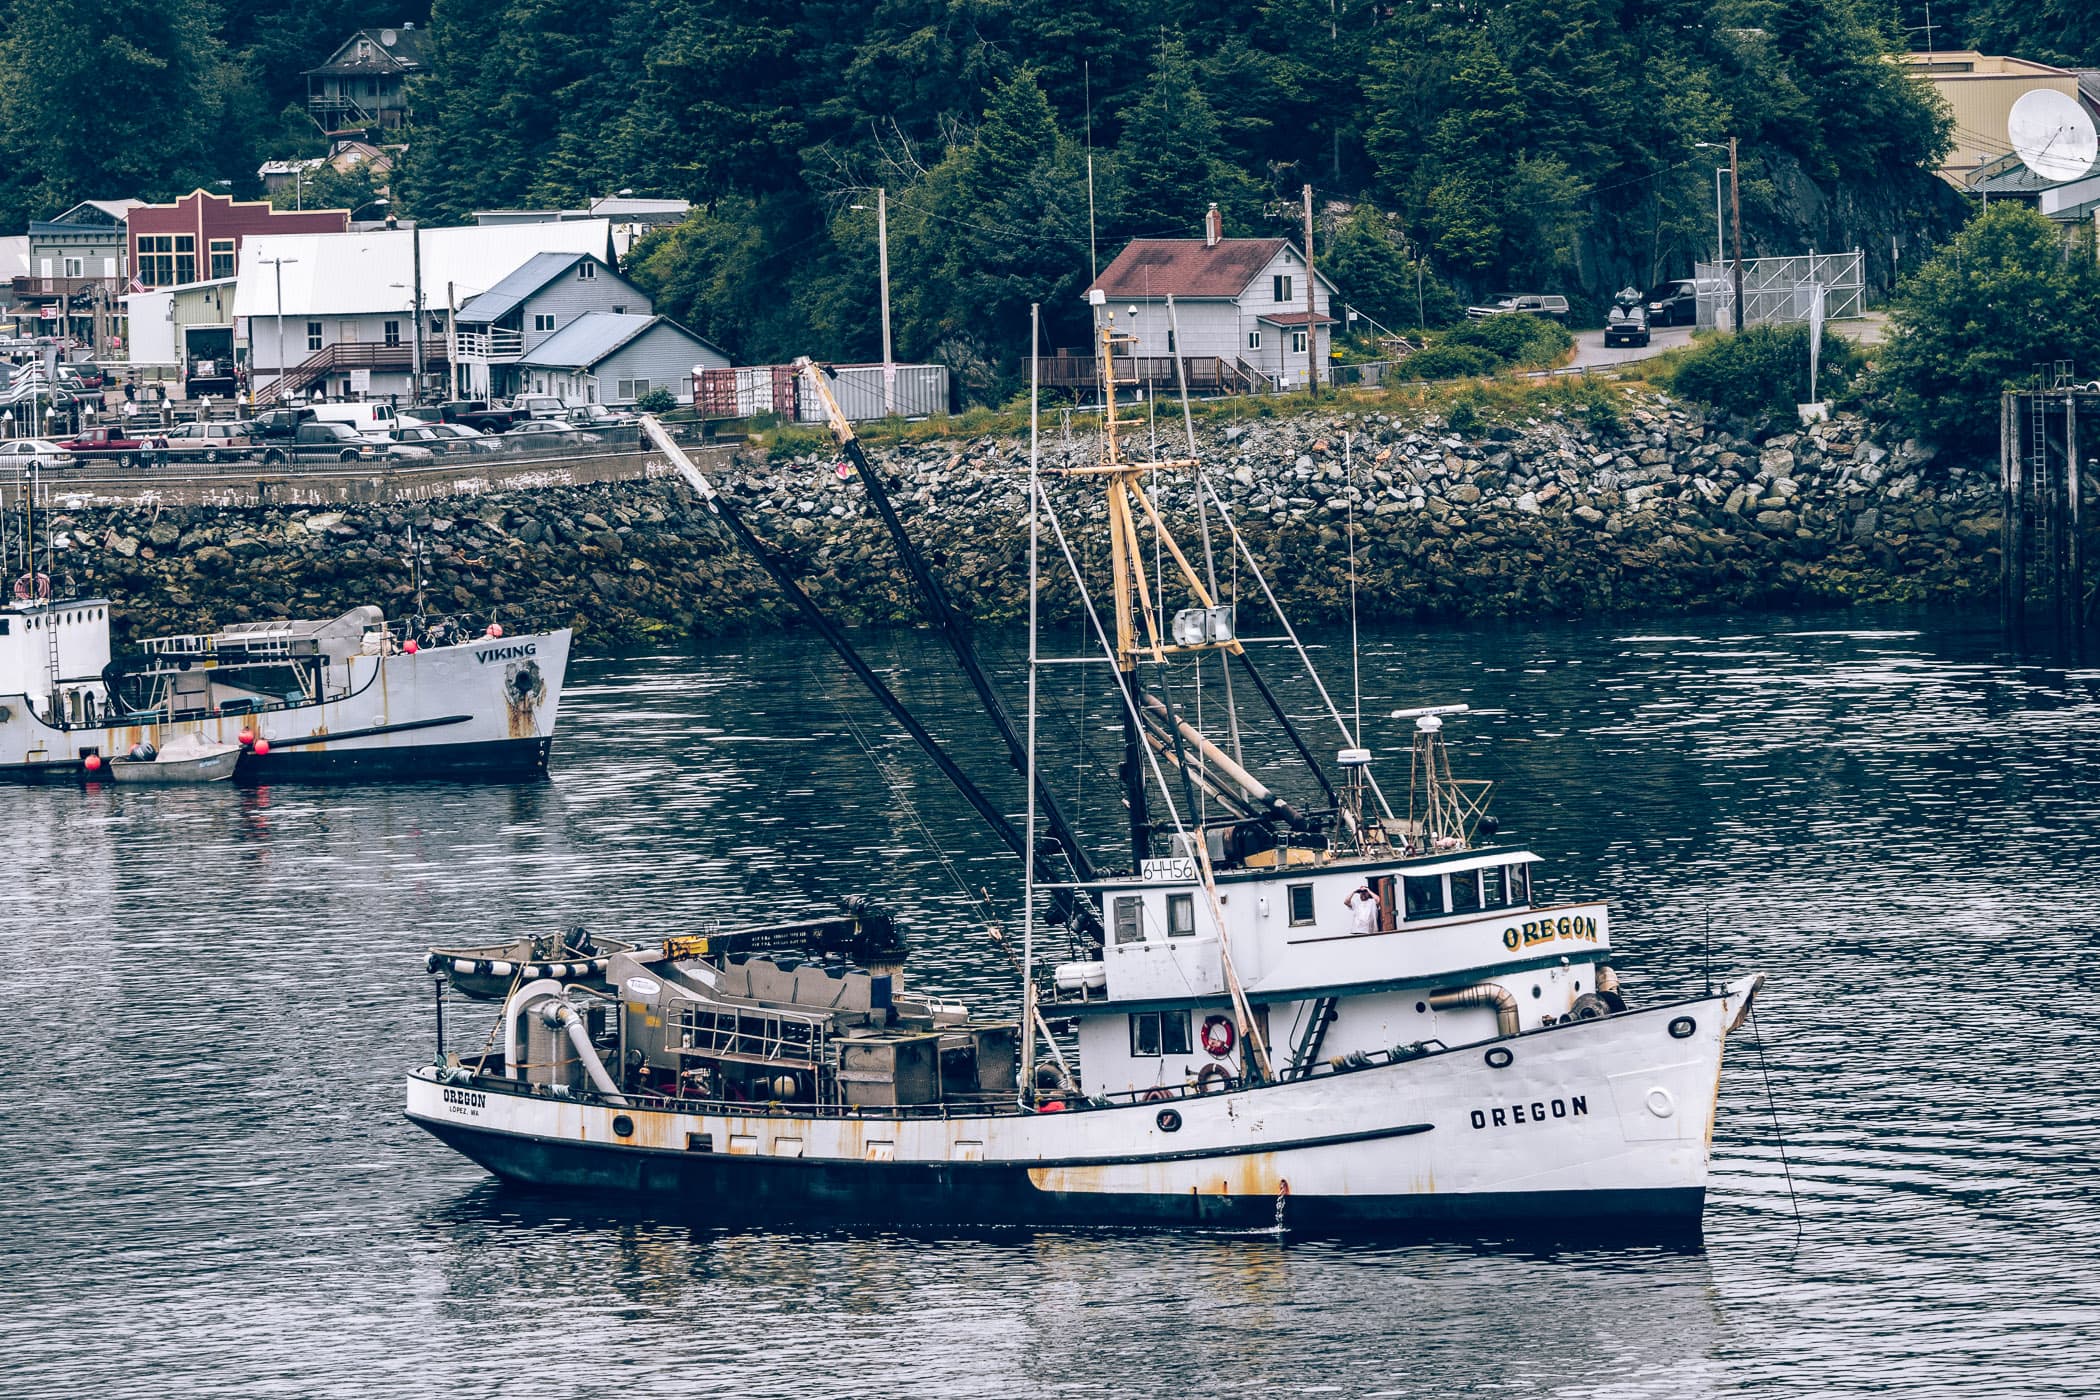 The fishing vessel Oregon, spotted in the Port of Ketchikan, Alaska.